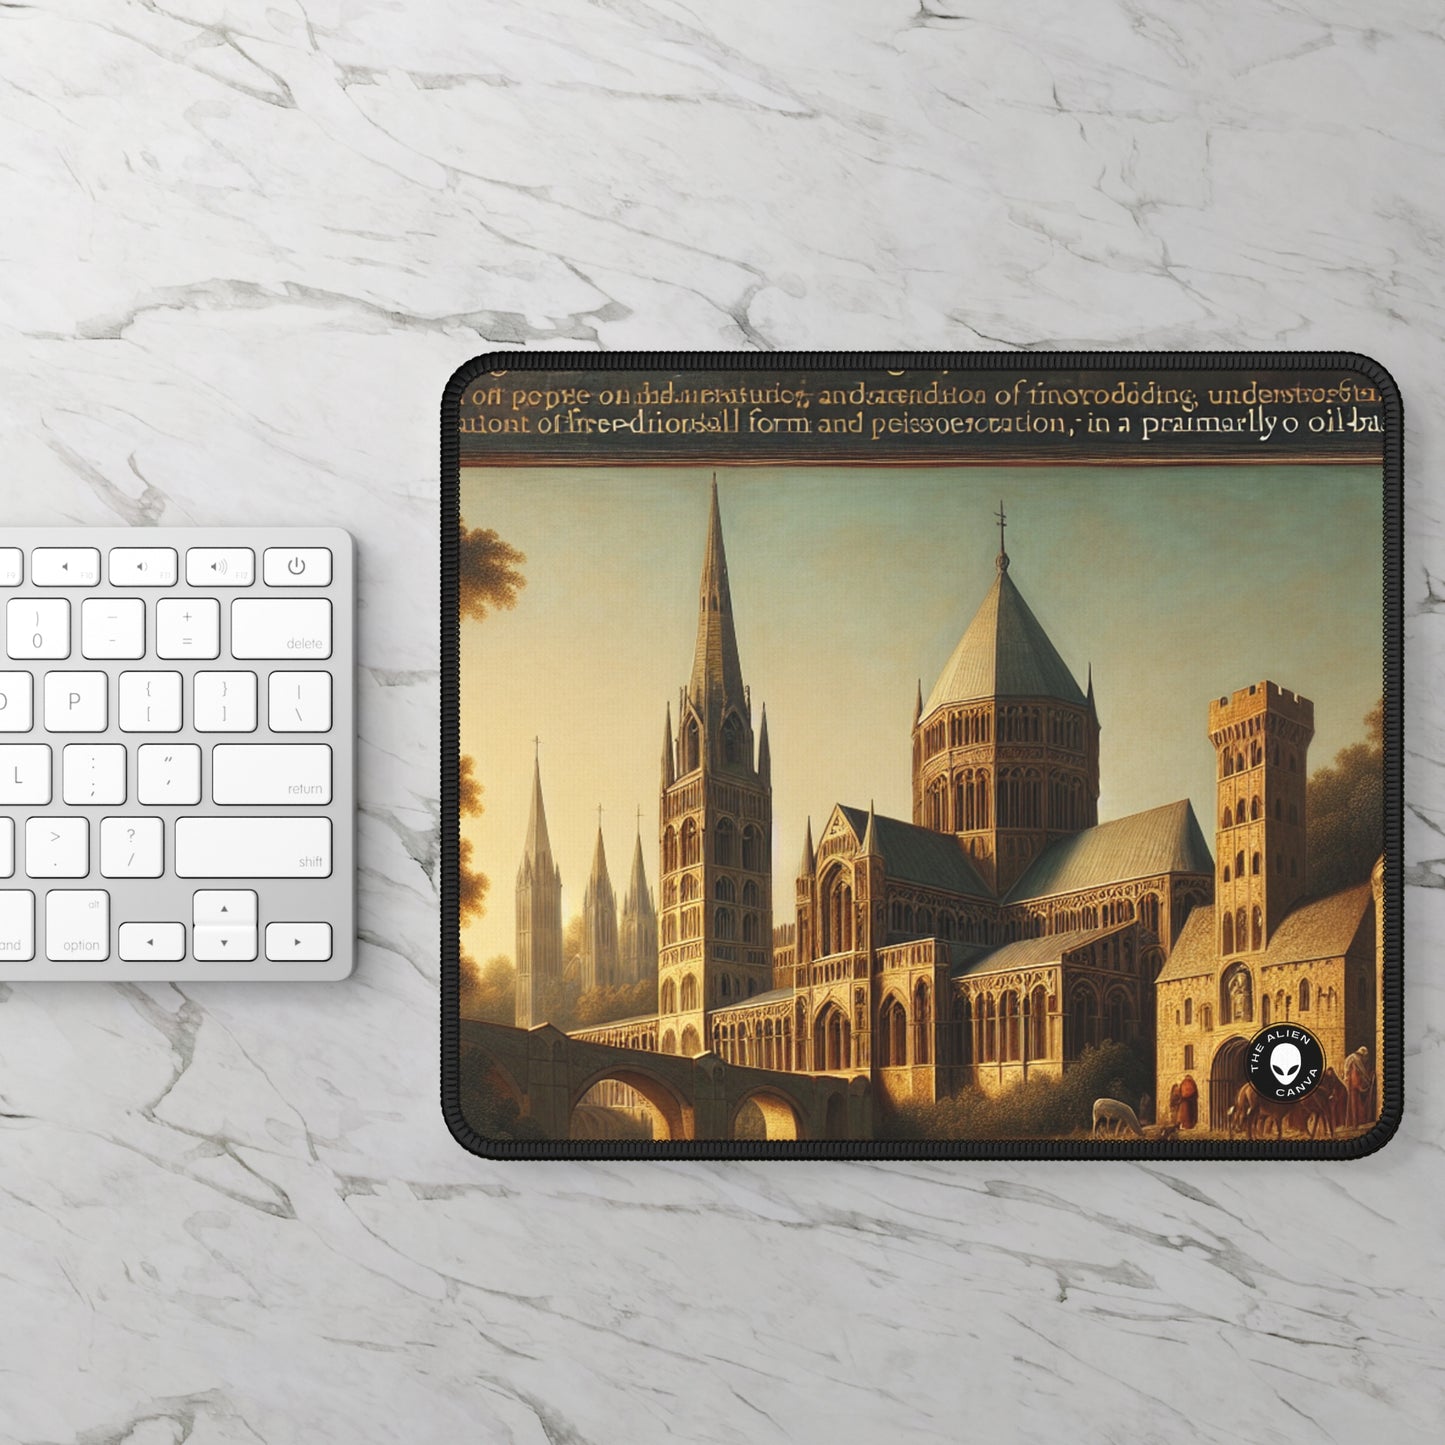 "Intellectual Discourse in the City Square" - The Alien Gaming Mouse Pad Proto-Renaissance